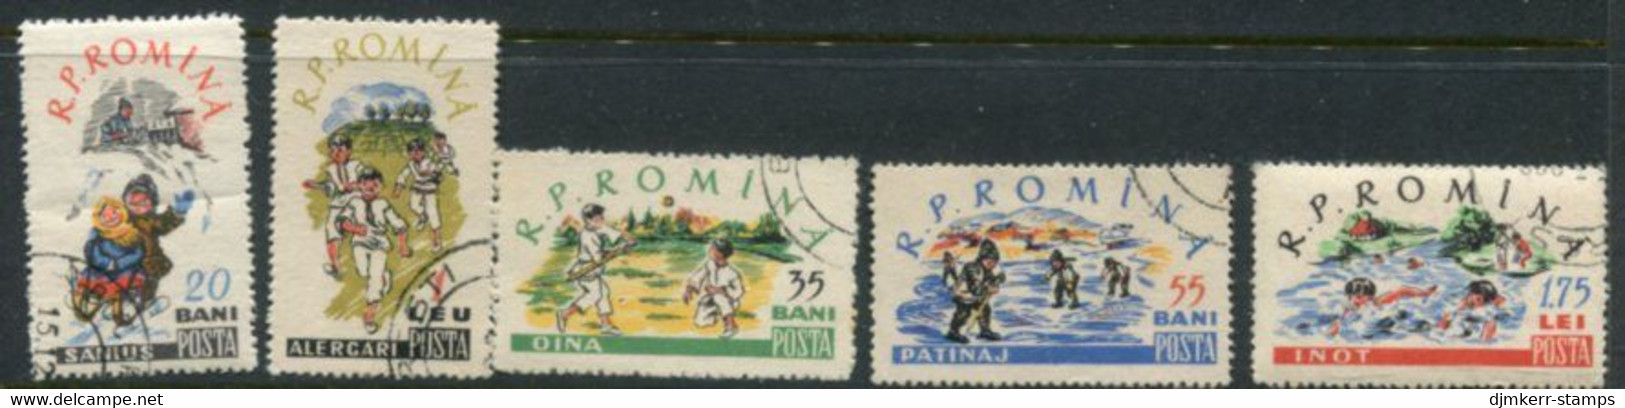 ROMANIA 1960 Childrens' Sport Used.  Michel 1913-17 - Used Stamps